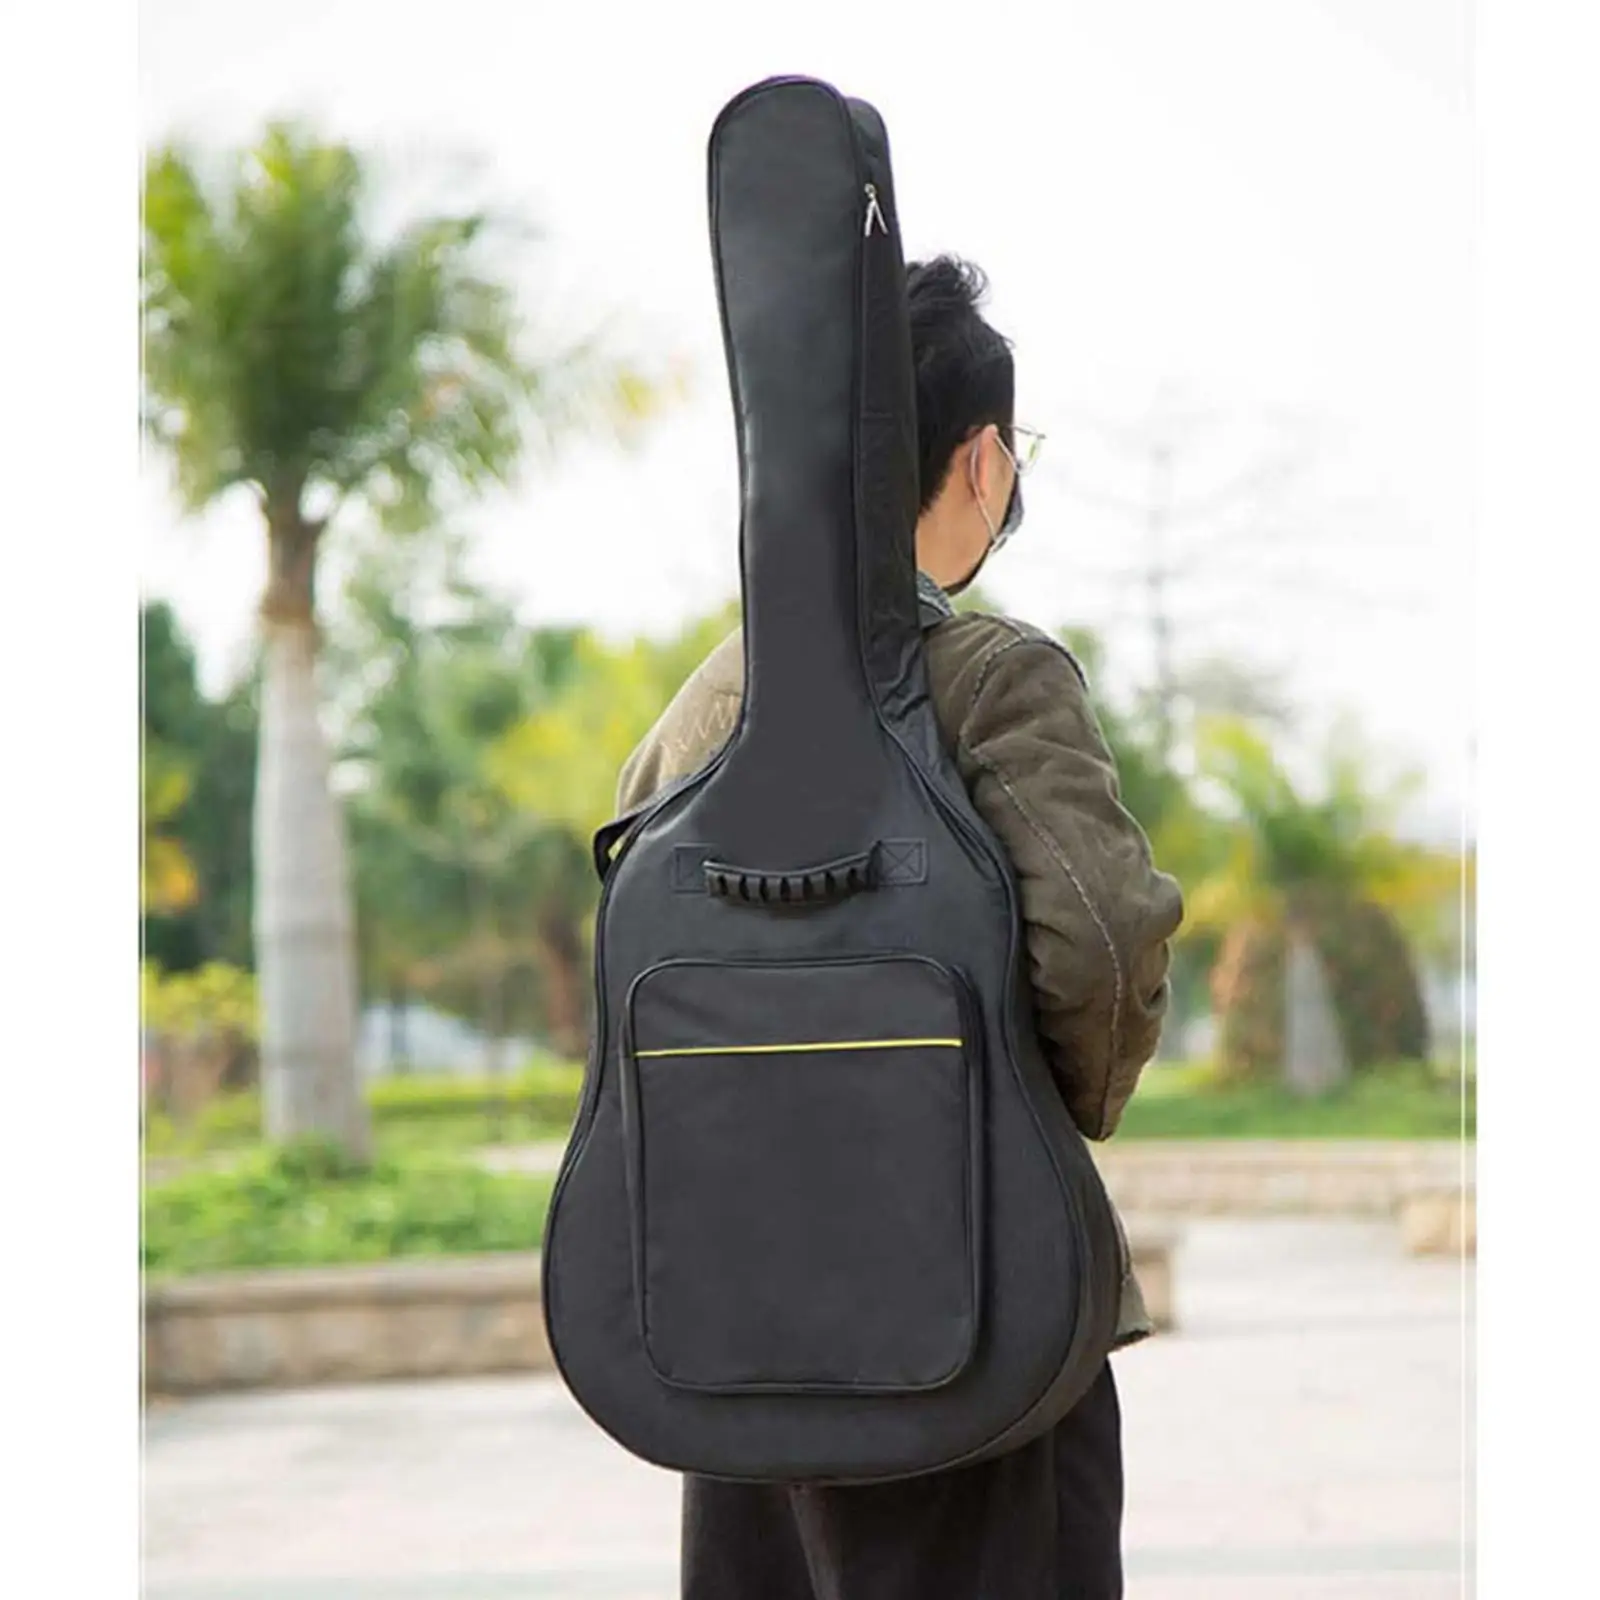 36 Inch Acoustic Guitar Padding Sponge Thick Waterproof Guitar Carry Case for Protective Black